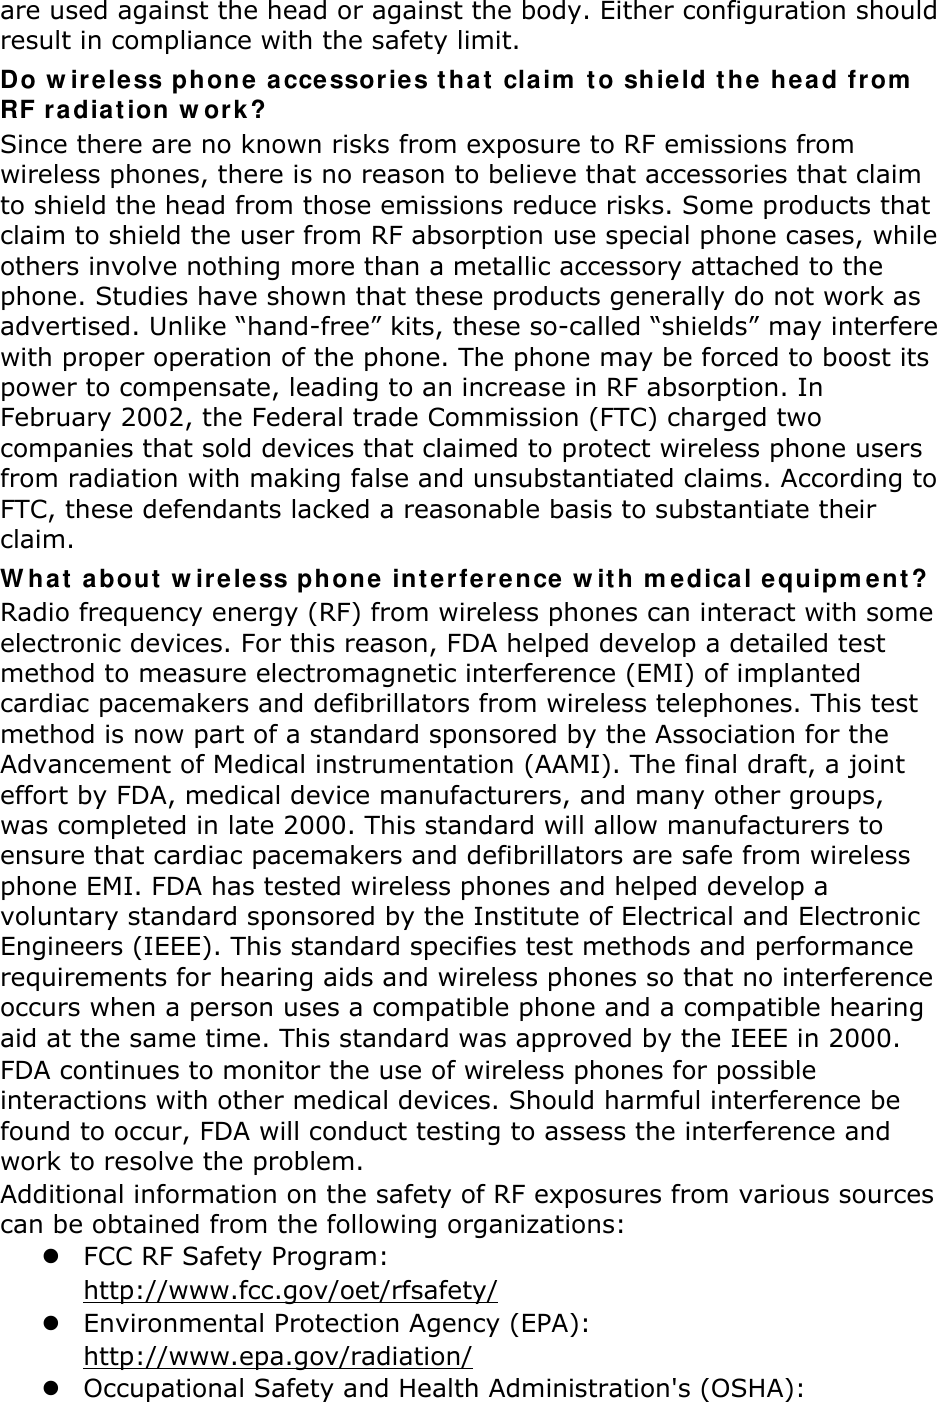 are used against the head or against the body. Either configuration should result in compliance with the safety limit. Do wireless phone accessories that claim to shield the head from RF radiation work? Since there are no known risks from exposure to RF emissions from wireless phones, there is no reason to believe that accessories that claim to shield the head from those emissions reduce risks. Some products that claim to shield the user from RF absorption use special phone cases, while others involve nothing more than a metallic accessory attached to the phone. Studies have shown that these products generally do not work as advertised. Unlike “hand-free” kits, these so-called “shields” may interfere with proper operation of the phone. The phone may be forced to boost its power to compensate, leading to an increase in RF absorption. In February 2002, the Federal trade Commission (FTC) charged two companies that sold devices that claimed to protect wireless phone users from radiation with making false and unsubstantiated claims. According to FTC, these defendants lacked a reasonable basis to substantiate their claim. What about wireless phone interference with medical equipment? Radio frequency energy (RF) from wireless phones can interact with some electronic devices. For this reason, FDA helped develop a detailed test method to measure electromagnetic interference (EMI) of implanted cardiac pacemakers and defibrillators from wireless telephones. This test method is now part of a standard sponsored by the Association for the Advancement of Medical instrumentation (AAMI). The final draft, a joint effort by FDA, medical device manufacturers, and many other groups, was completed in late 2000. This standard will allow manufacturers to ensure that cardiac pacemakers and defibrillators are safe from wireless phone EMI. FDA has tested wireless phones and helped develop a voluntary standard sponsored by the Institute of Electrical and Electronic Engineers (IEEE). This standard specifies test methods and performance requirements for hearing aids and wireless phones so that no interference occurs when a person uses a compatible phone and a compatible hearing aid at the same time. This standard was approved by the IEEE in 2000. FDA continues to monitor the use of wireless phones for possible interactions with other medical devices. Should harmful interference be found to occur, FDA will conduct testing to assess the interference and work to resolve the problem. Additional information on the safety of RF exposures from various sources can be obtained from the following organizations: z FCC RF Safety Program:  http://www.fcc.gov/oet/rfsafety/z Environmental Protection Agency (EPA):  http://www.epa.gov/radiation/z Occupational Safety and Health Administration&apos;s (OSHA):   